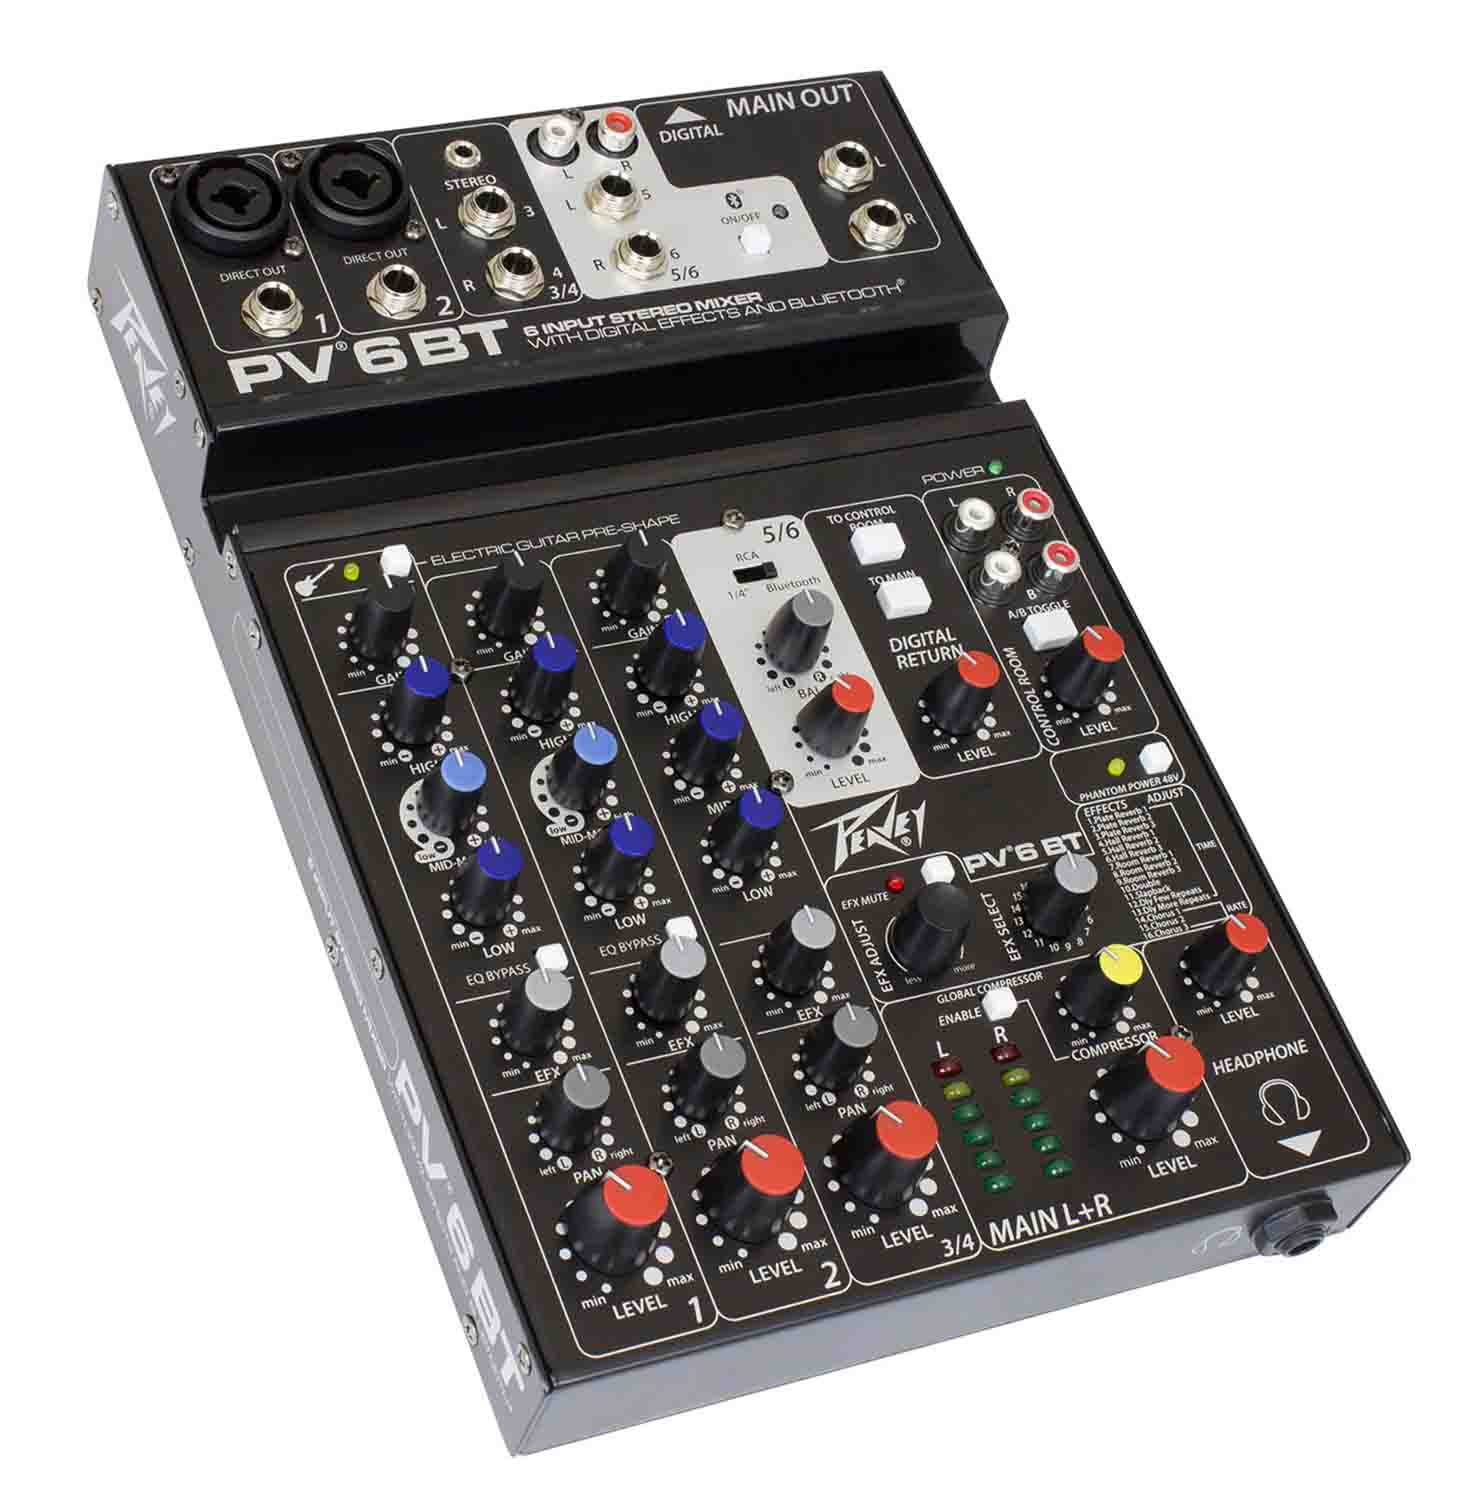 B-Stock: Peavey PV 6 BT Compact Mixer 6 Channel with Bluetooth - Hollywood DJ